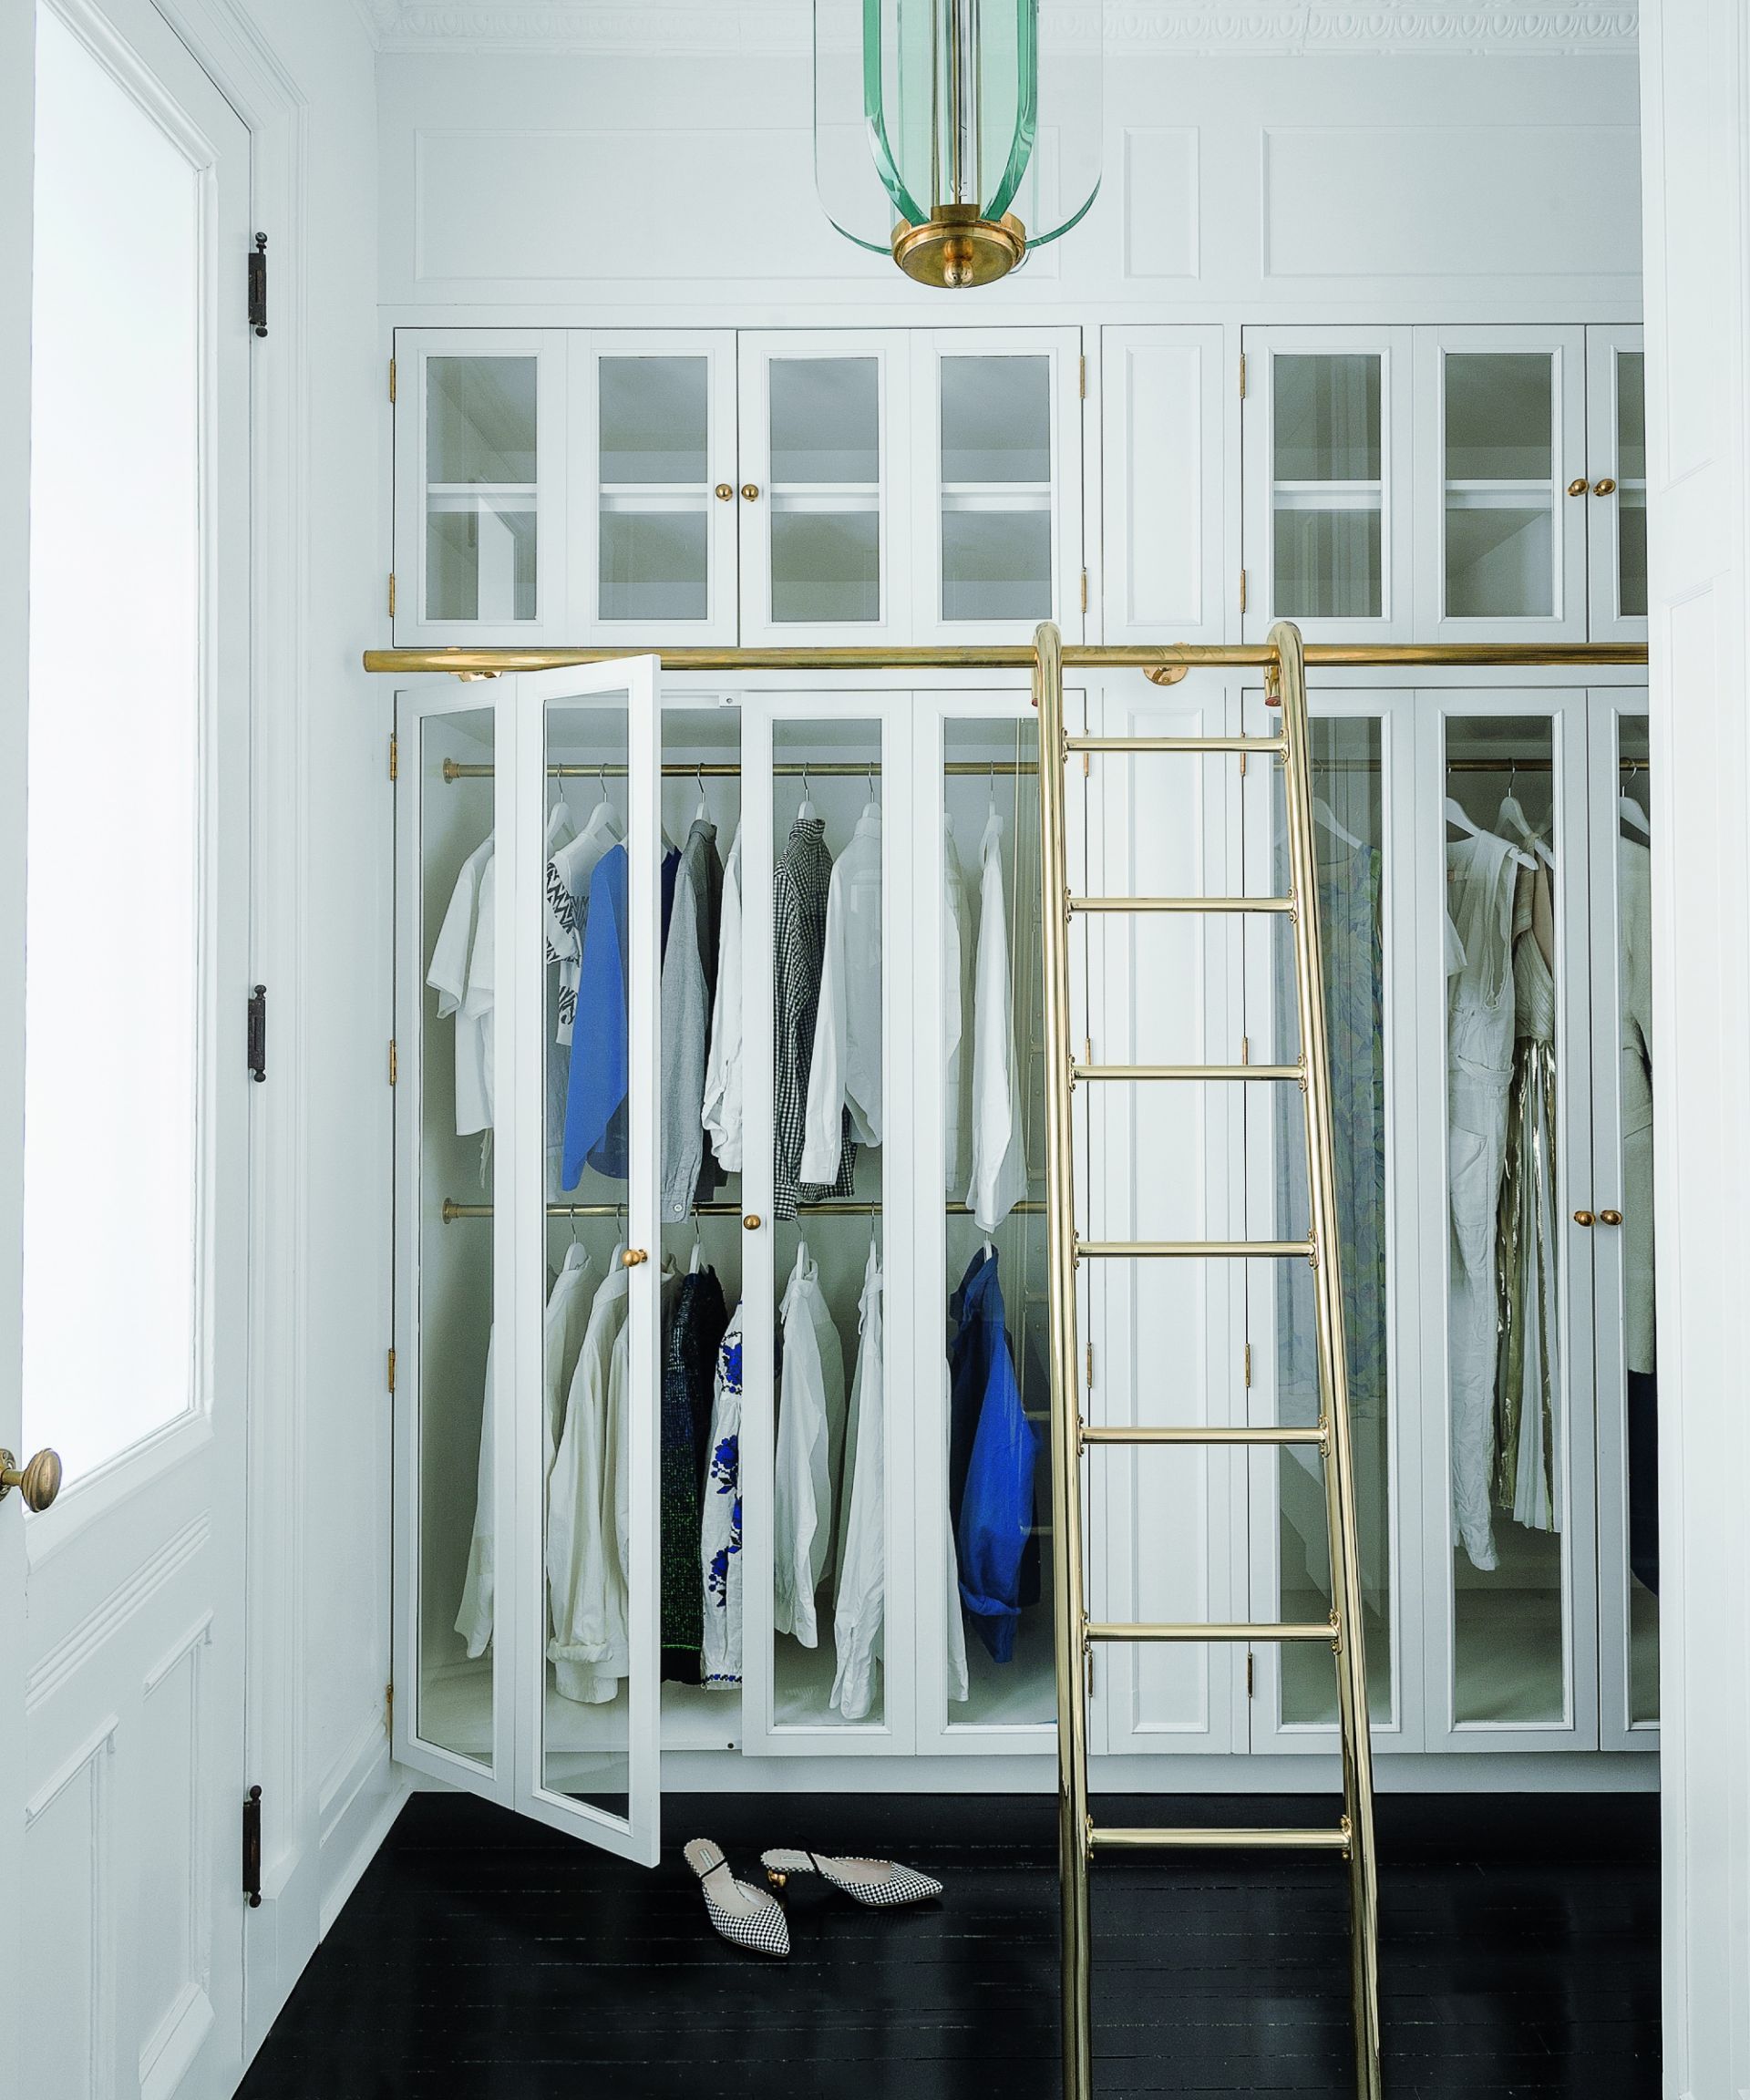 Small closet ideas – 10 smart looks for wardrobes in tiny spaces